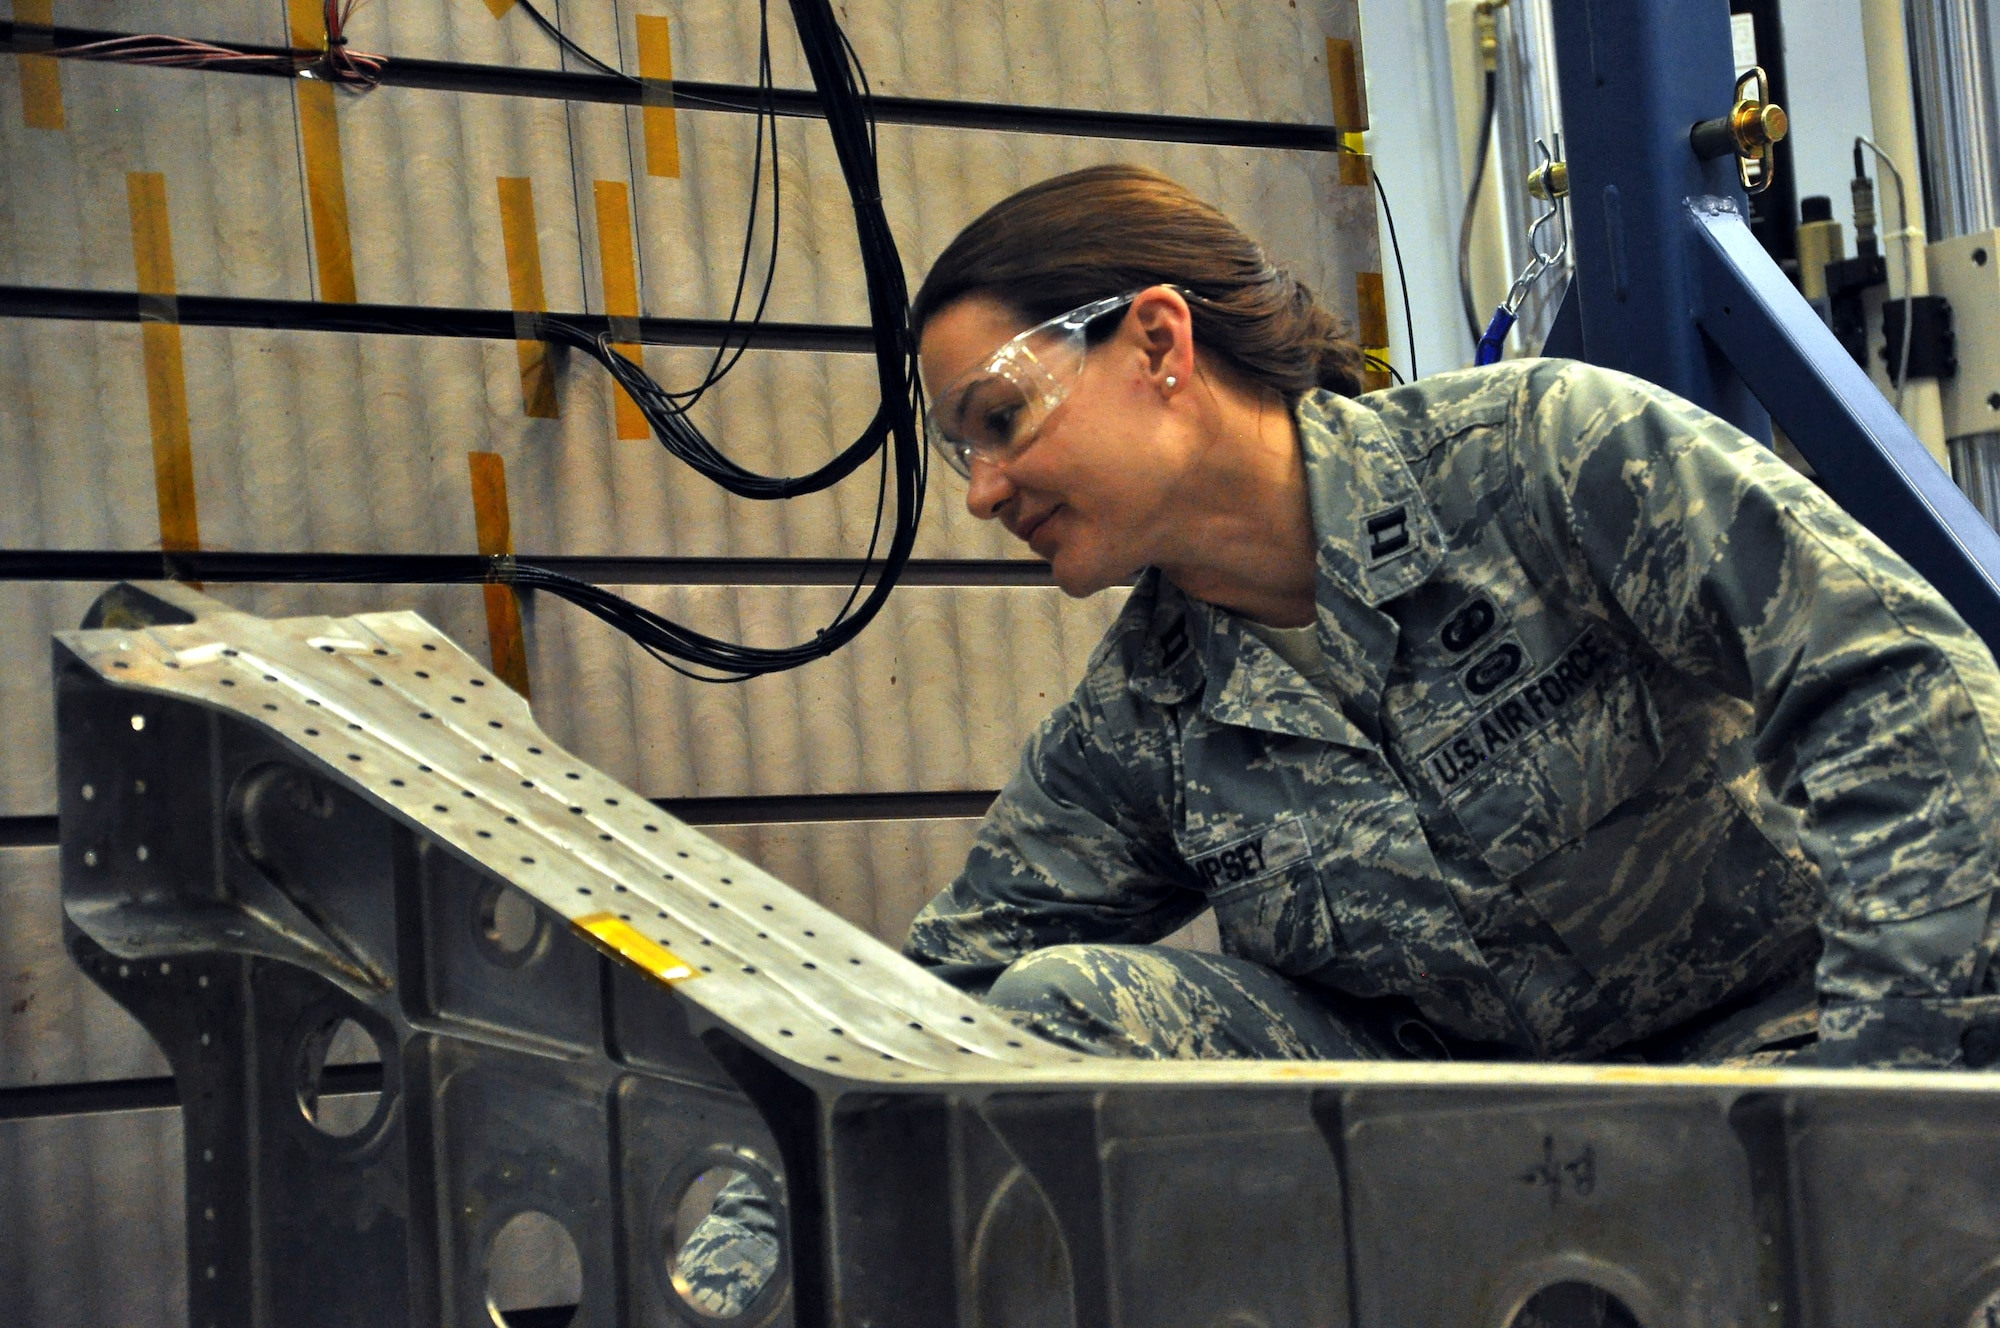 Capt. Allison Dempsey, Air Force Research Laboratory Aerospace Systems Directorate deputy branch chief, Wright-Patterson Air Force Base, Ohio, prepares for an experiment using the Structural Health Monitoring Test Bed. The SHM Test Bed enables AFRL researchers to investigate the performance of emerging instrumentation technologies for sensing fatigue cracking and strain in aircraft structures. In this experiment, a beam-like structure is being used as an analog for real aircraft structures. New instrumentation technologies will enable improved characterization of damage state and usage in aircraft structures. "The technology options AFRL provides give our warfighters an advantage on the battlefields of today and tomorrow,” said AFRL commander Maj. Gen. Thomas Masiello. “Those options help ensure we are on the right side of an unfair fight against America's adversaries, and it's our mission to keep it that way.” (Air Force photo by Michele Eaton)